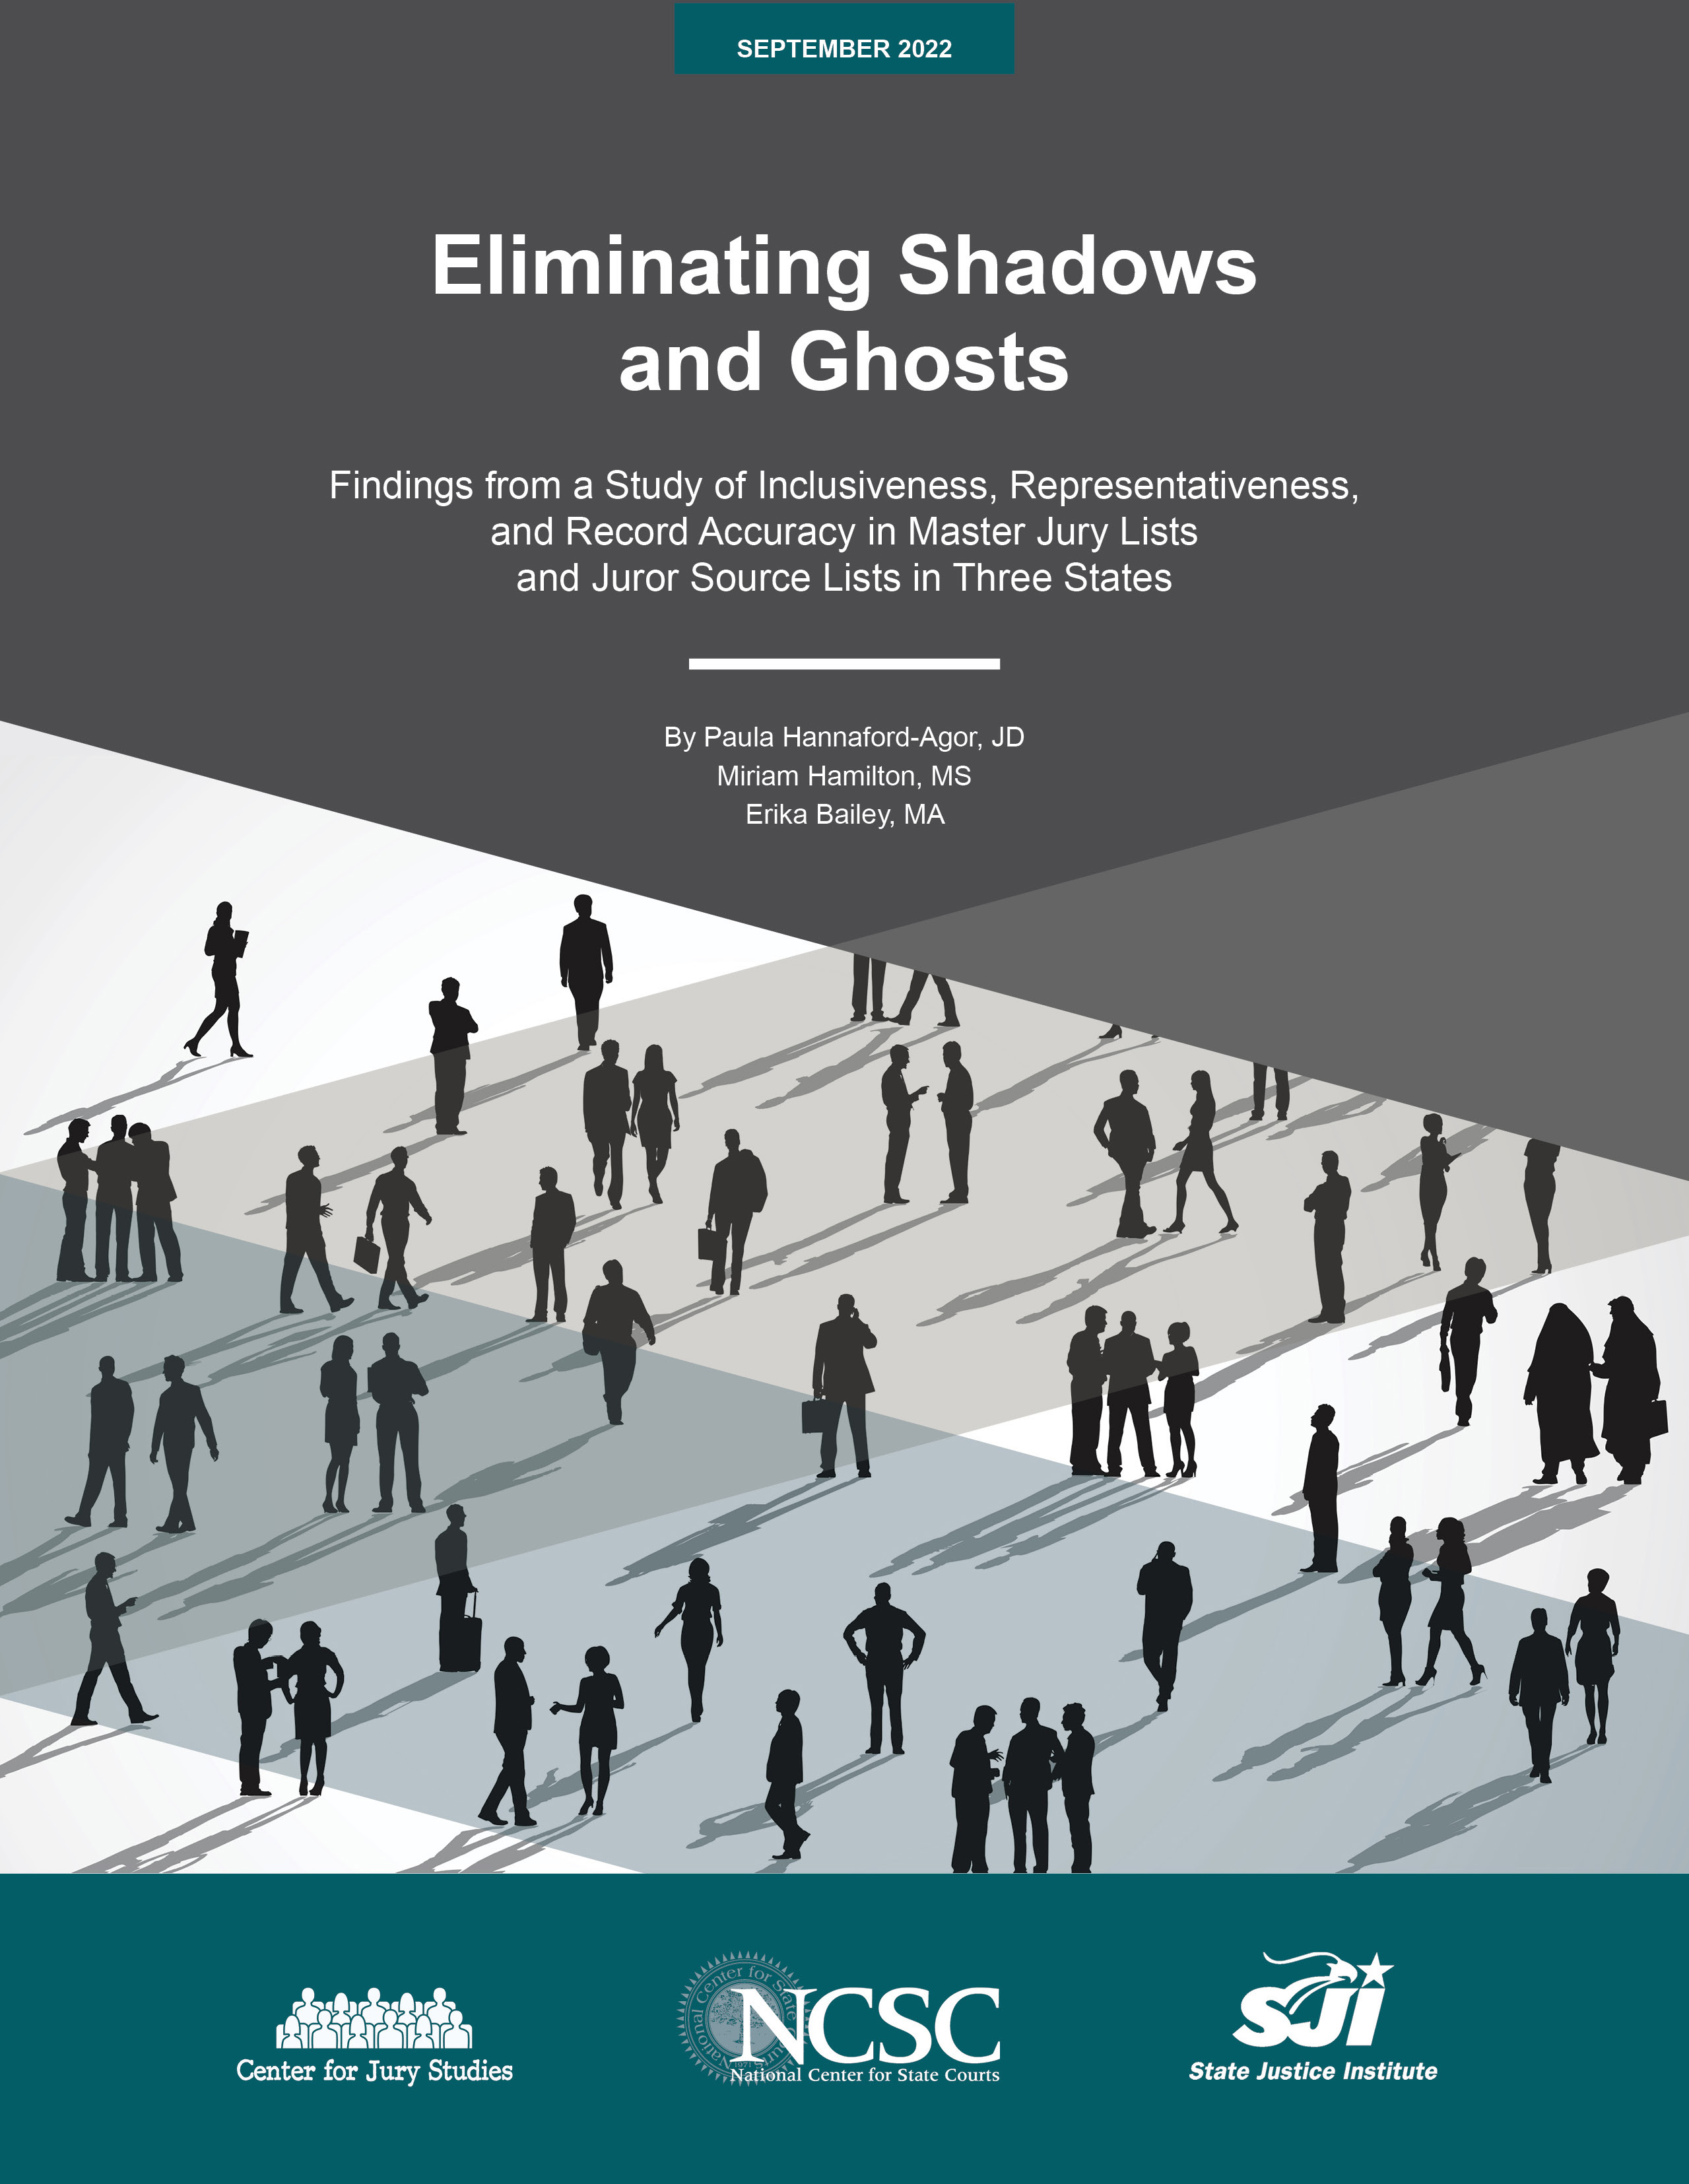 Image of business people and their shadows